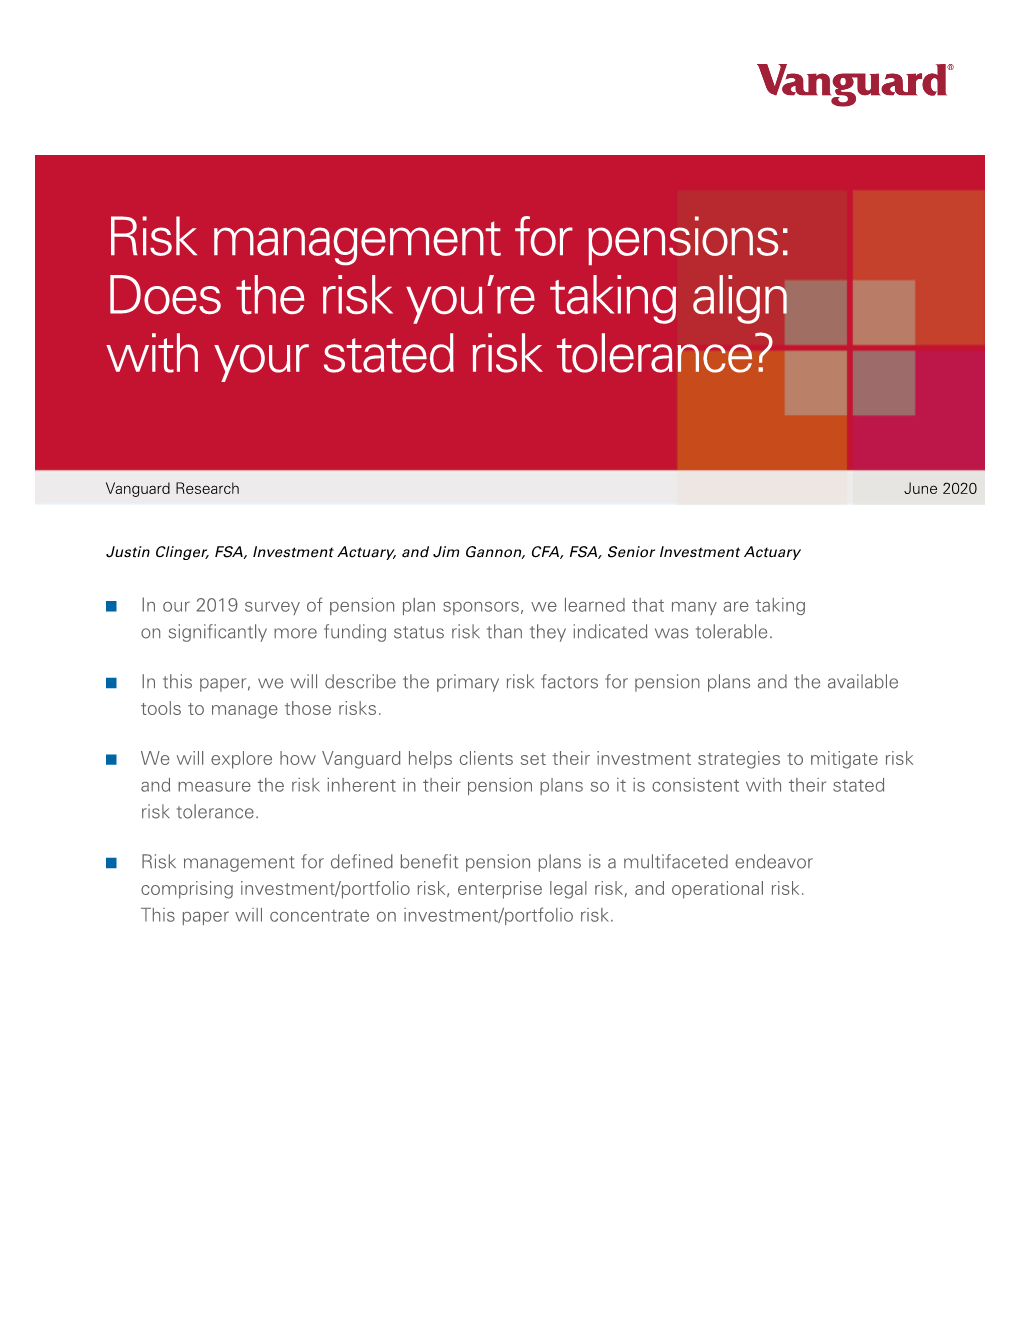 Risk Management for Pensions: Does the Risk You’Re Taking Align with Your Stated Risk Tolerance?